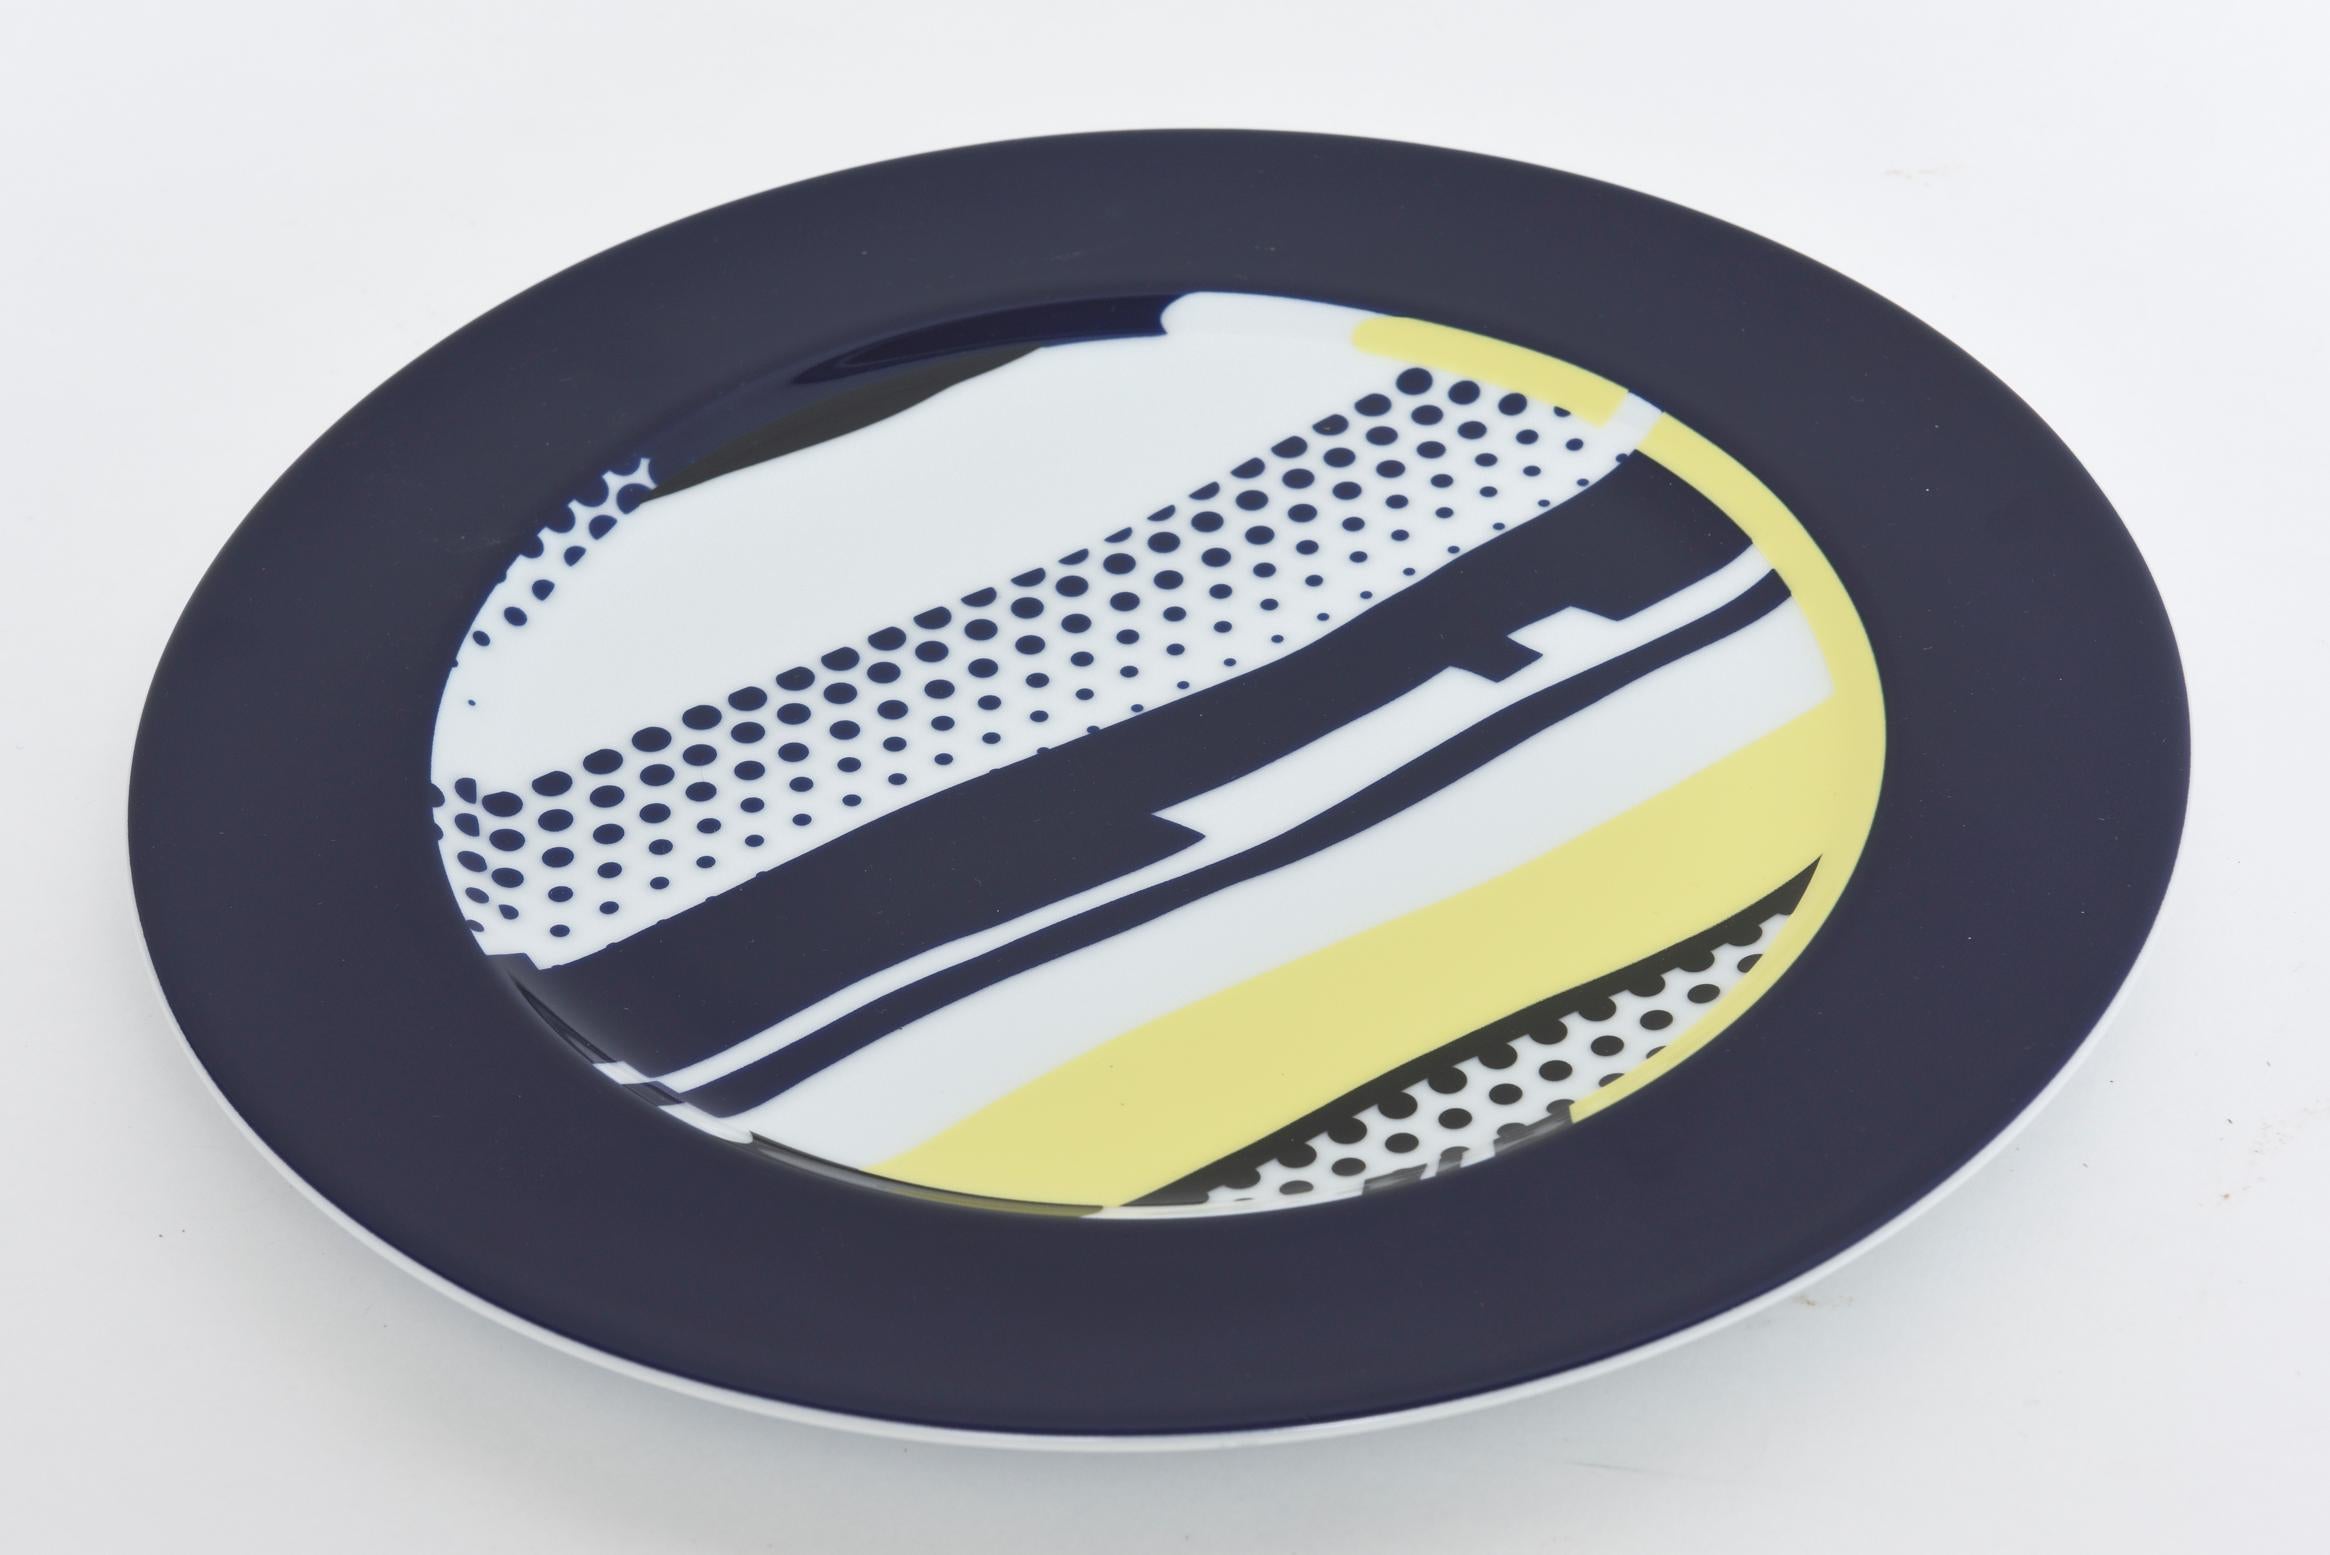 Roy Lichtenstein (1923-1997) designed plate on Rosenthal China. This collector's plate is #1611 from a limited edition of 3000 and hand colored. It is stamp signed on the reverse by the artist and marked Kunstlerplatzteller, Rosenthal, Germany. The